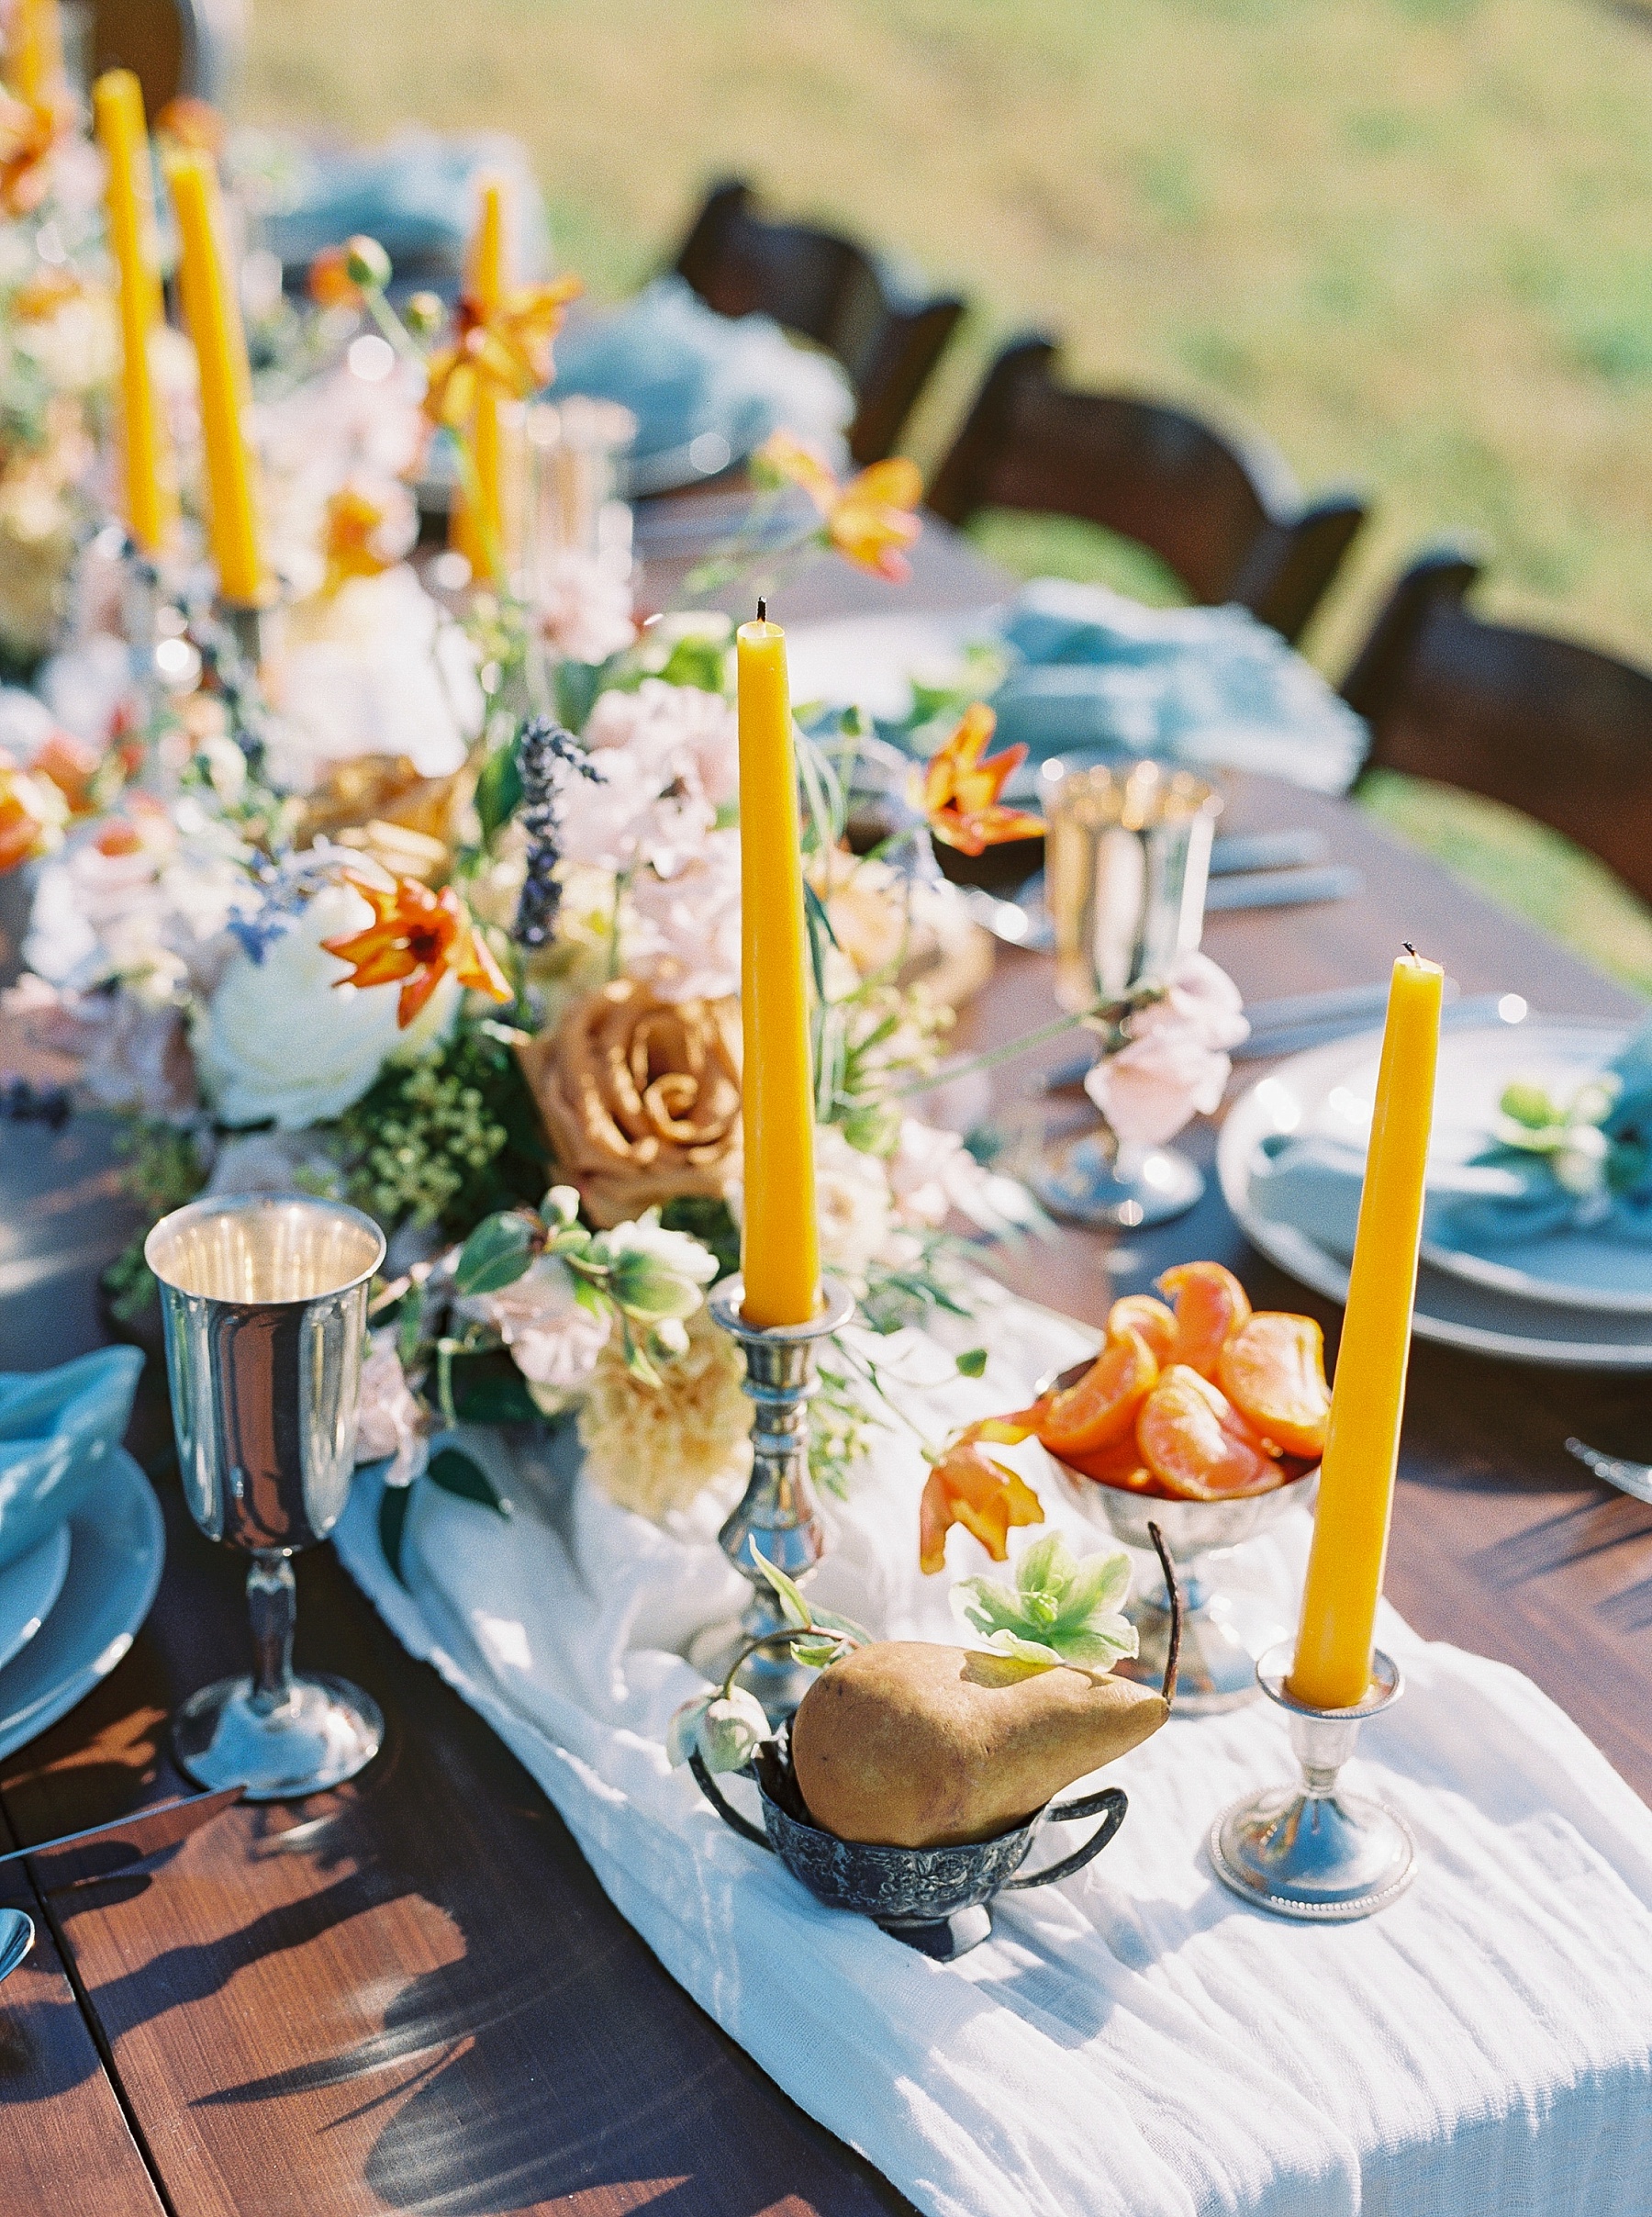 Intimate Spanish and French Inspired Destination Wedding with Lakeside Dinner Party at Dusk at Wildcliff by Kelsi Kliethermes Photography Best Missouri and Maui Wedding Photographer_0065.jpg